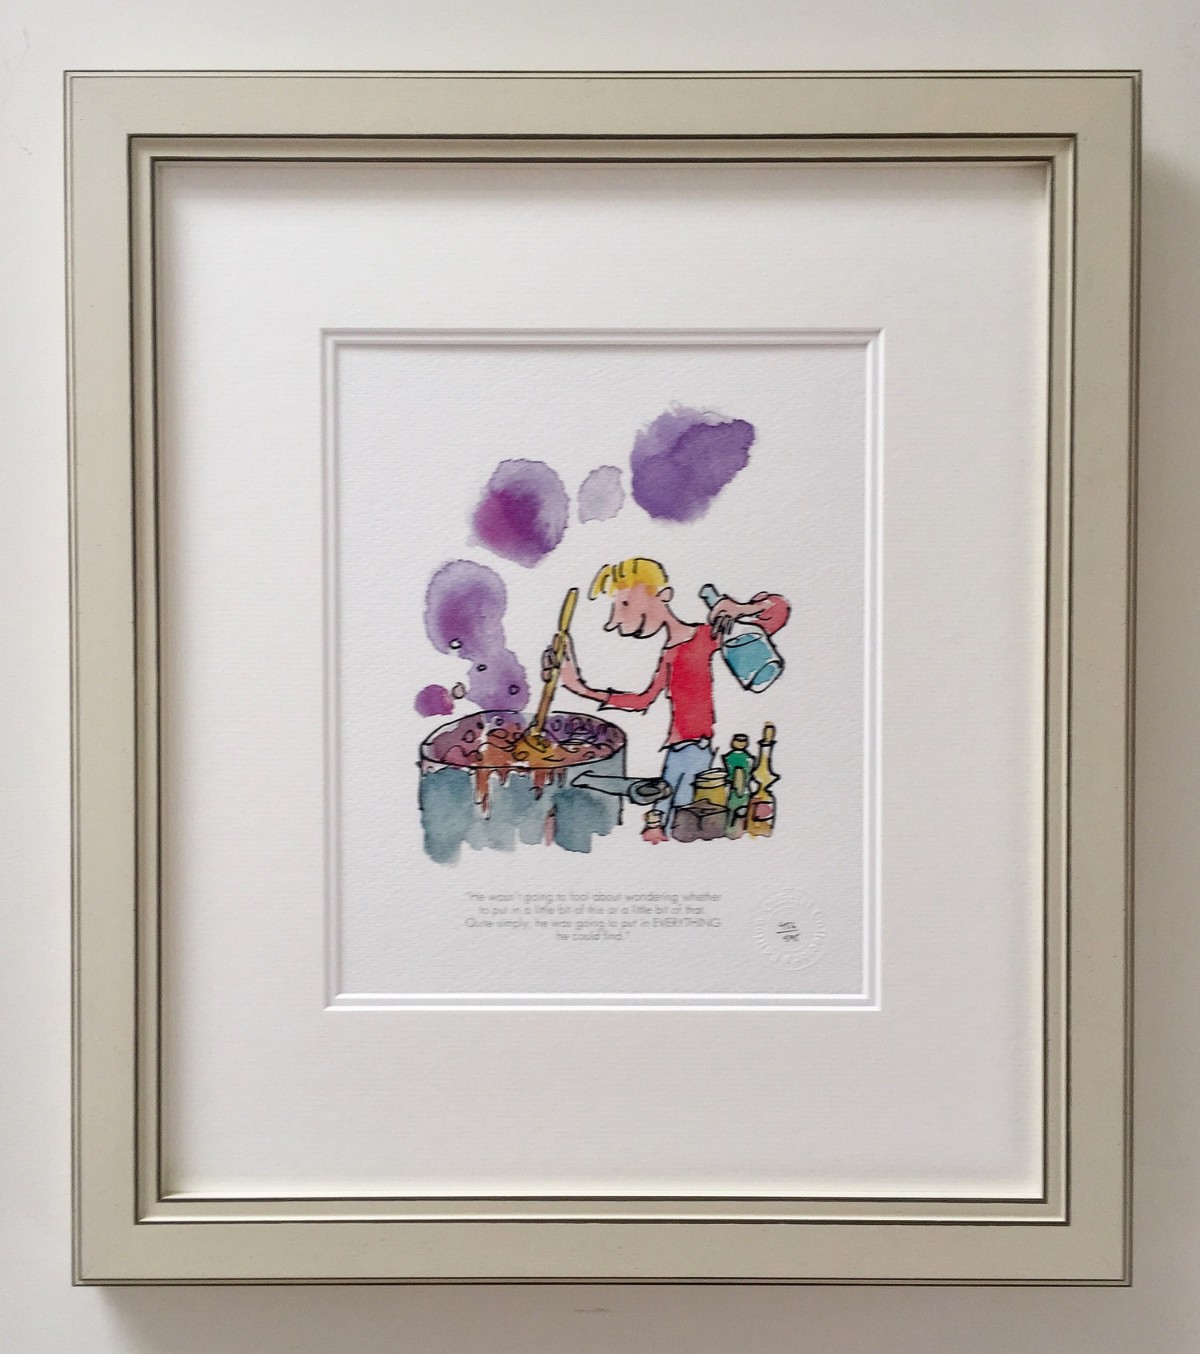 He Put in Everything he Could Find by Quentin Blake, Children | George | Marvellous | Medicine